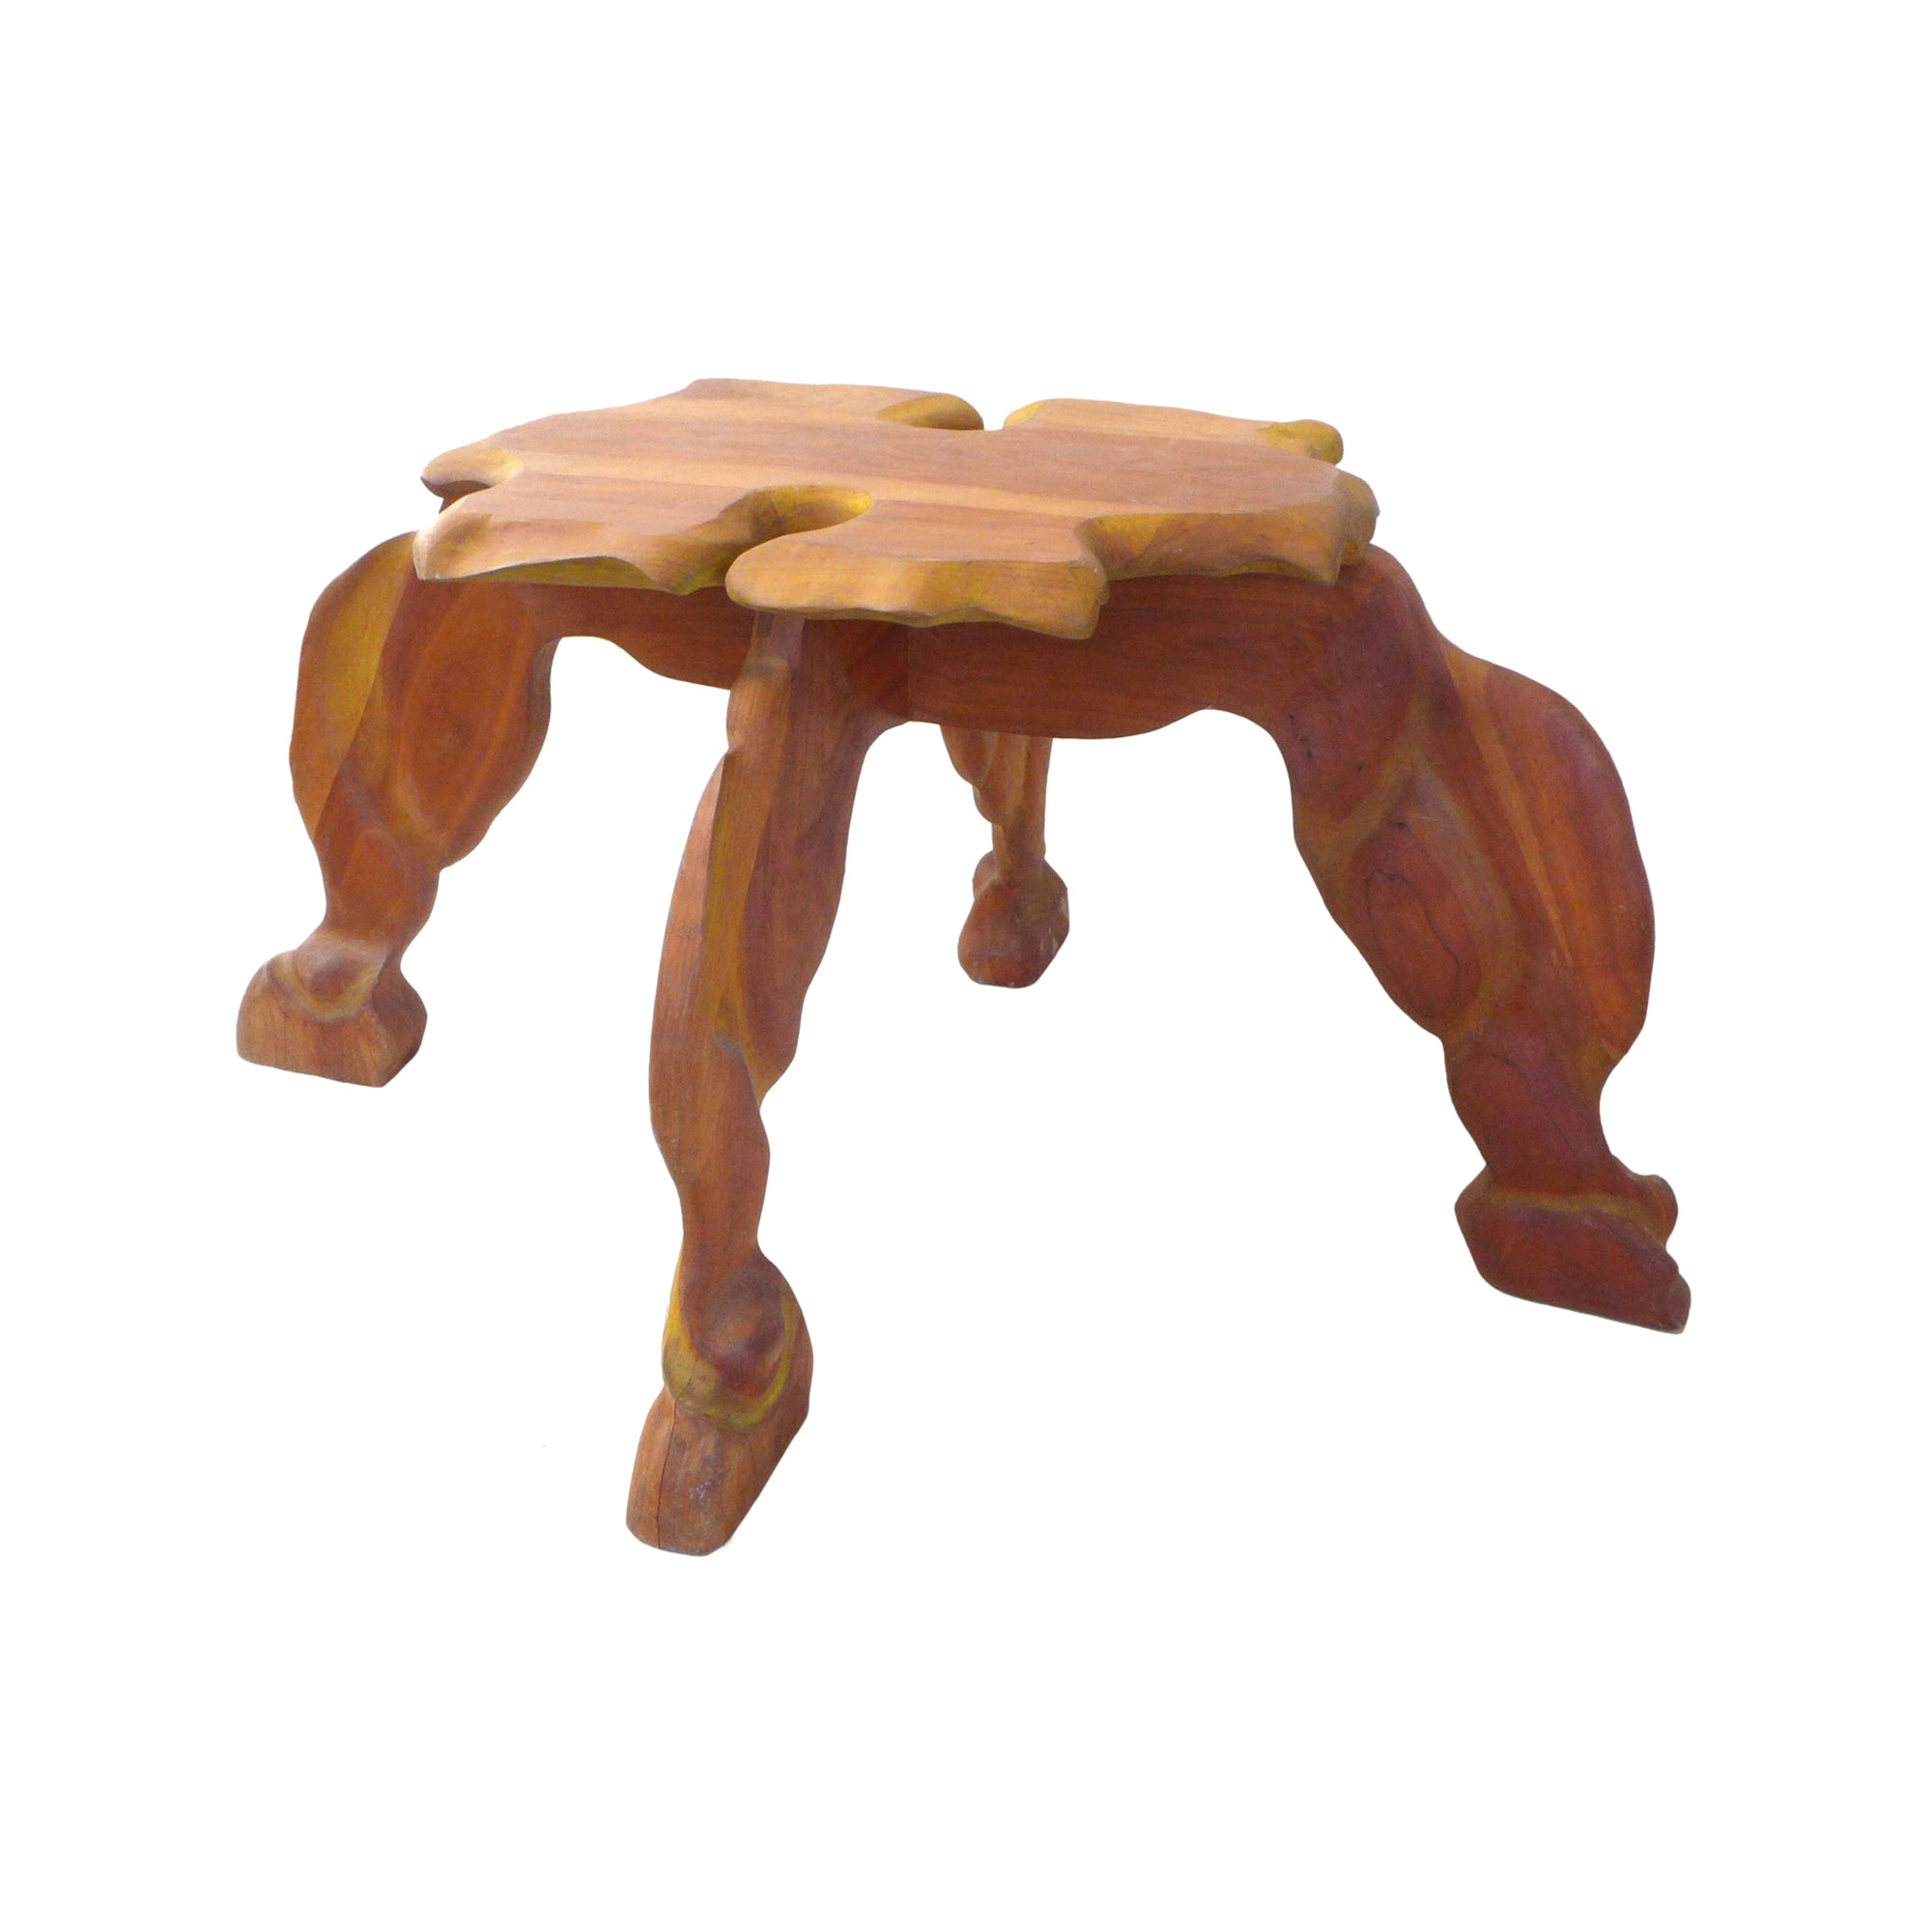 Sculptural Biomorphic Carved Wood Occasional Table